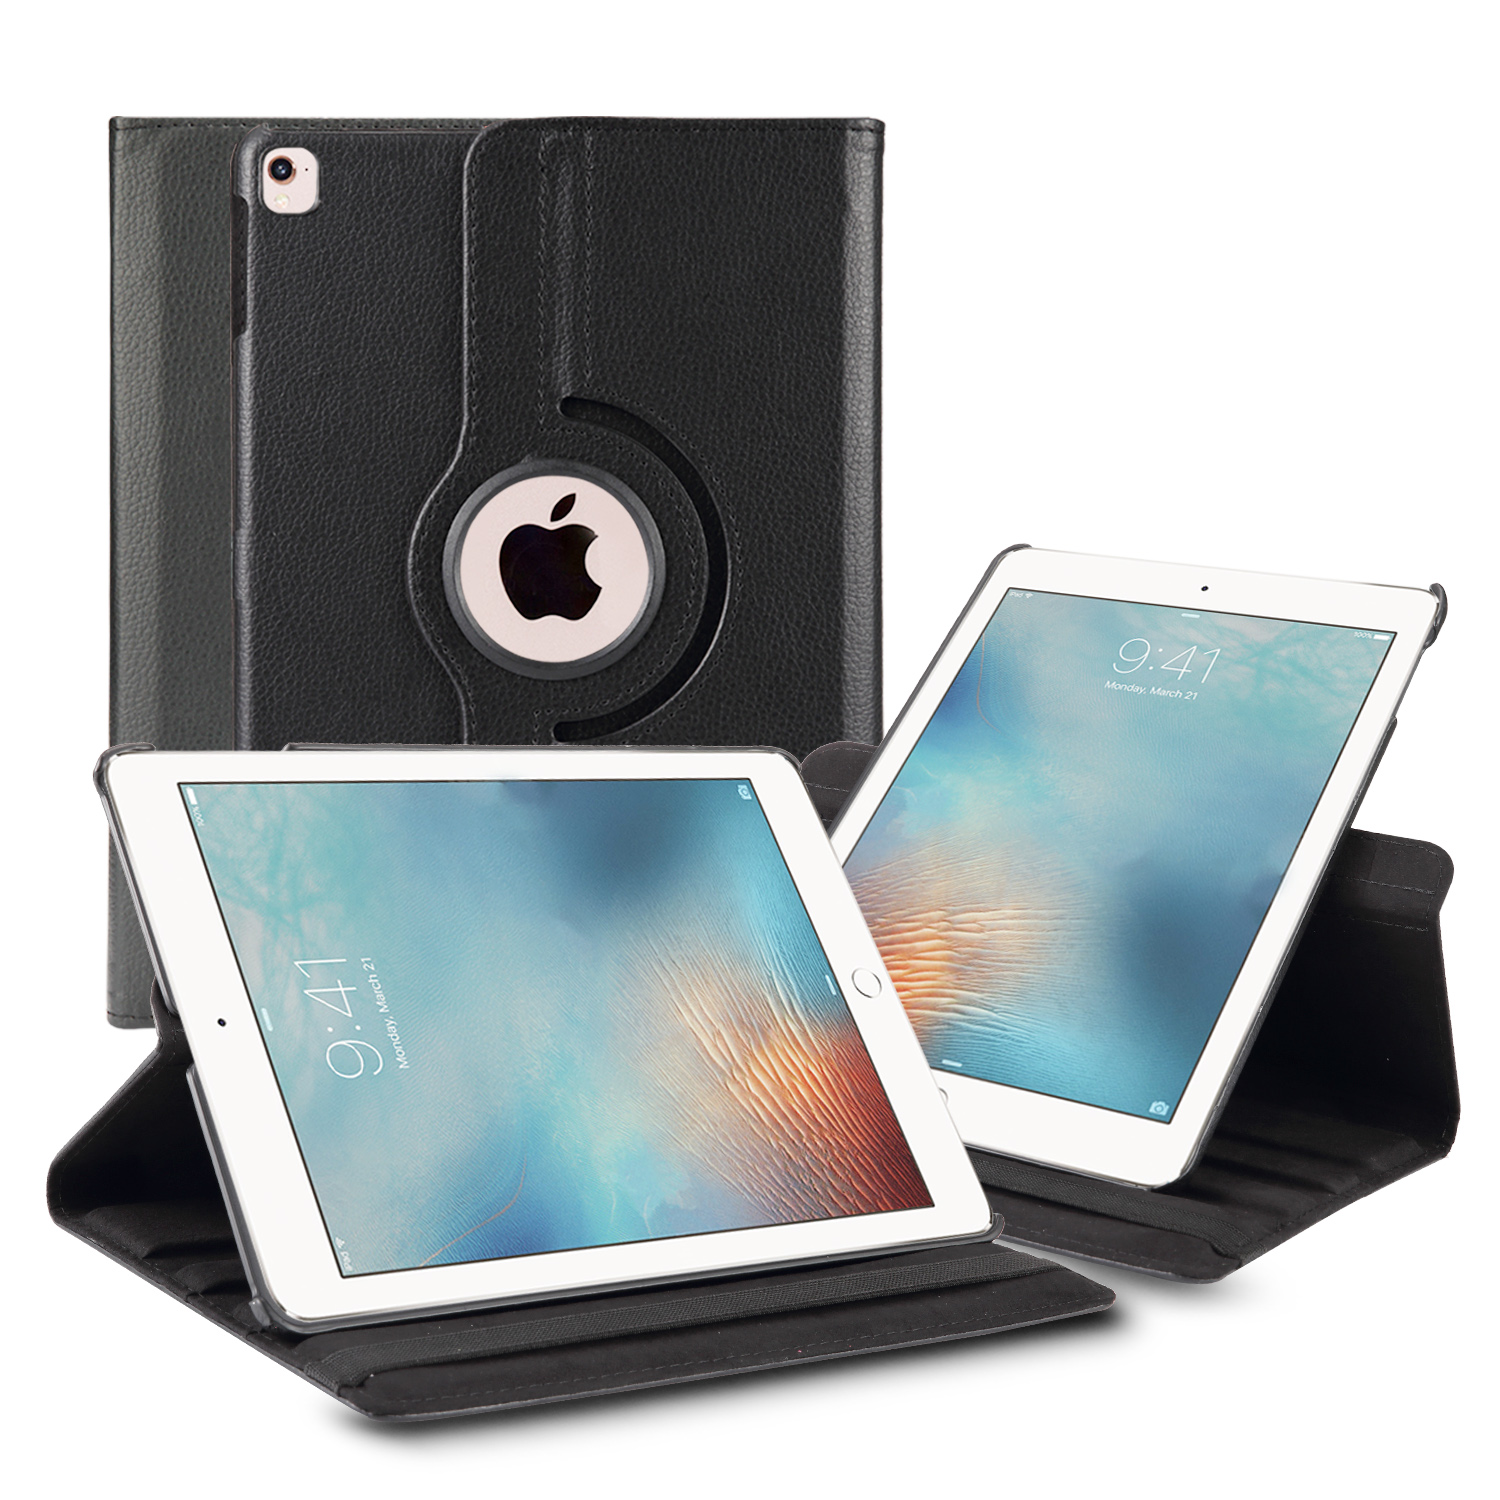 Leather-Cover-Stand-Case-With-Stylus-Pen-Slot for iPad 10.2 (Black)